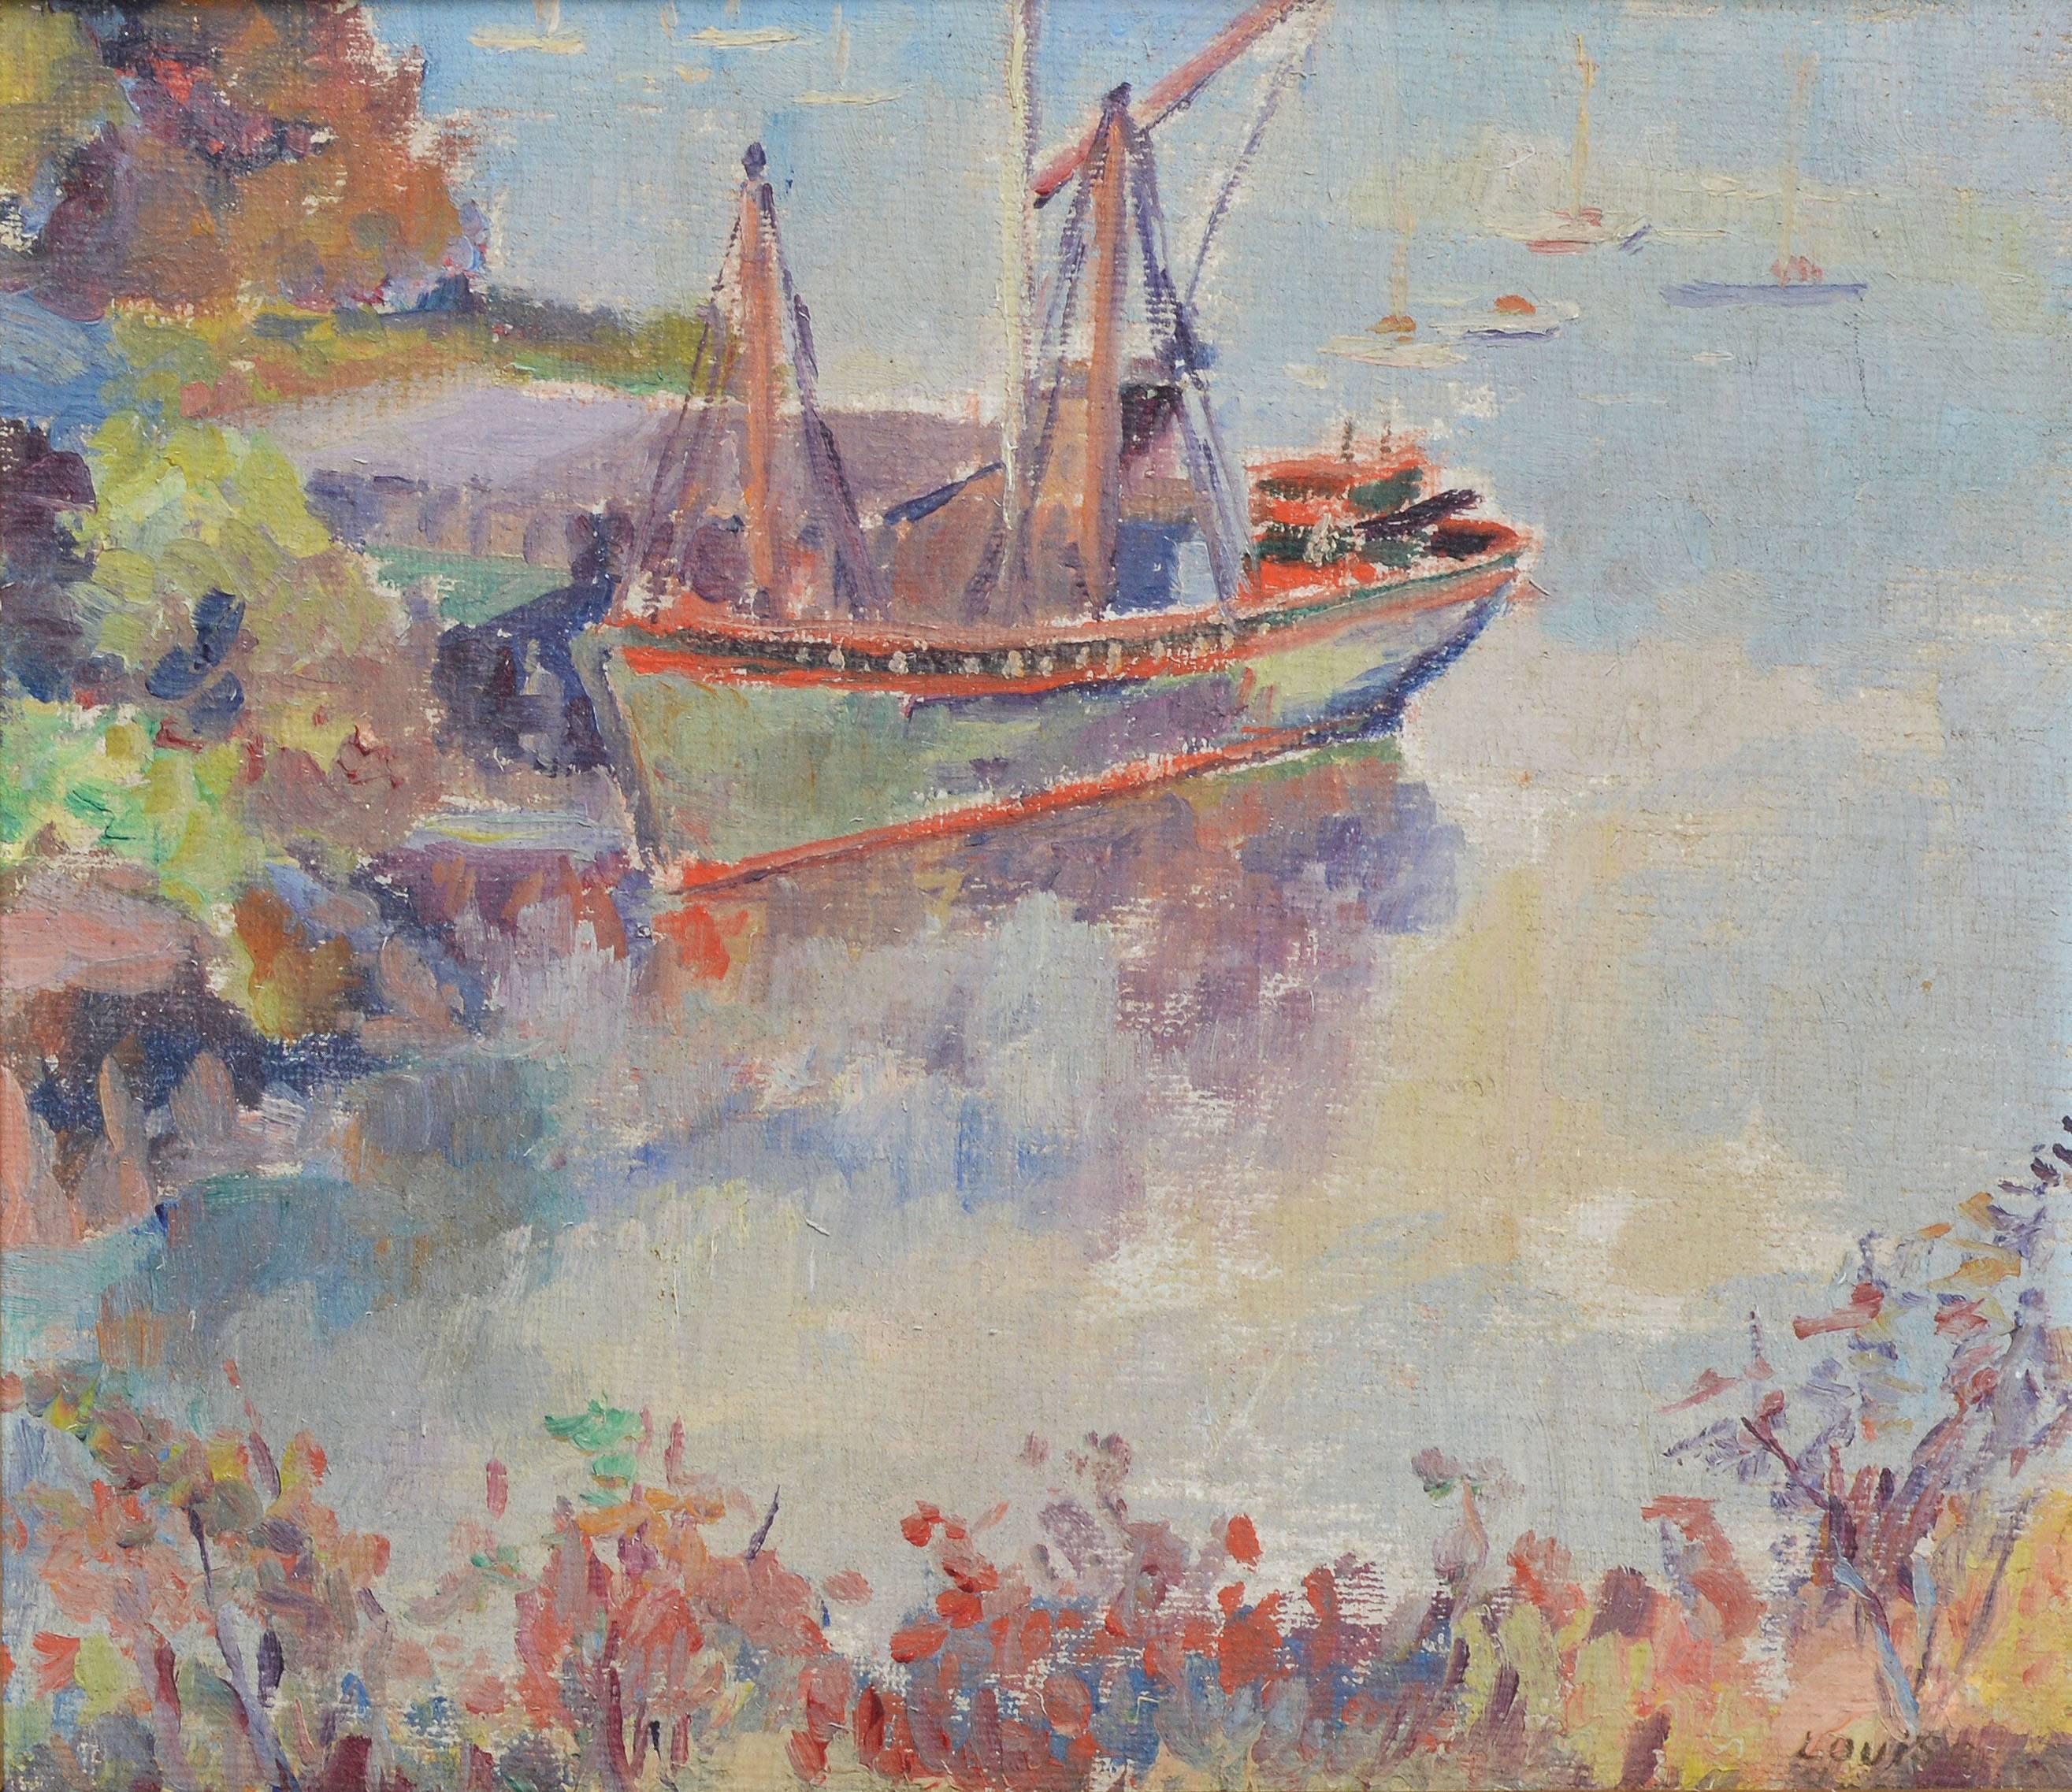 Impressionist view of Marblehead Mass by Louise Snow  (1890 - 1982).  Oil on board, circa 1920.  Signed lower right.  Displayed in a giltwood frame.  Image size, 6.5